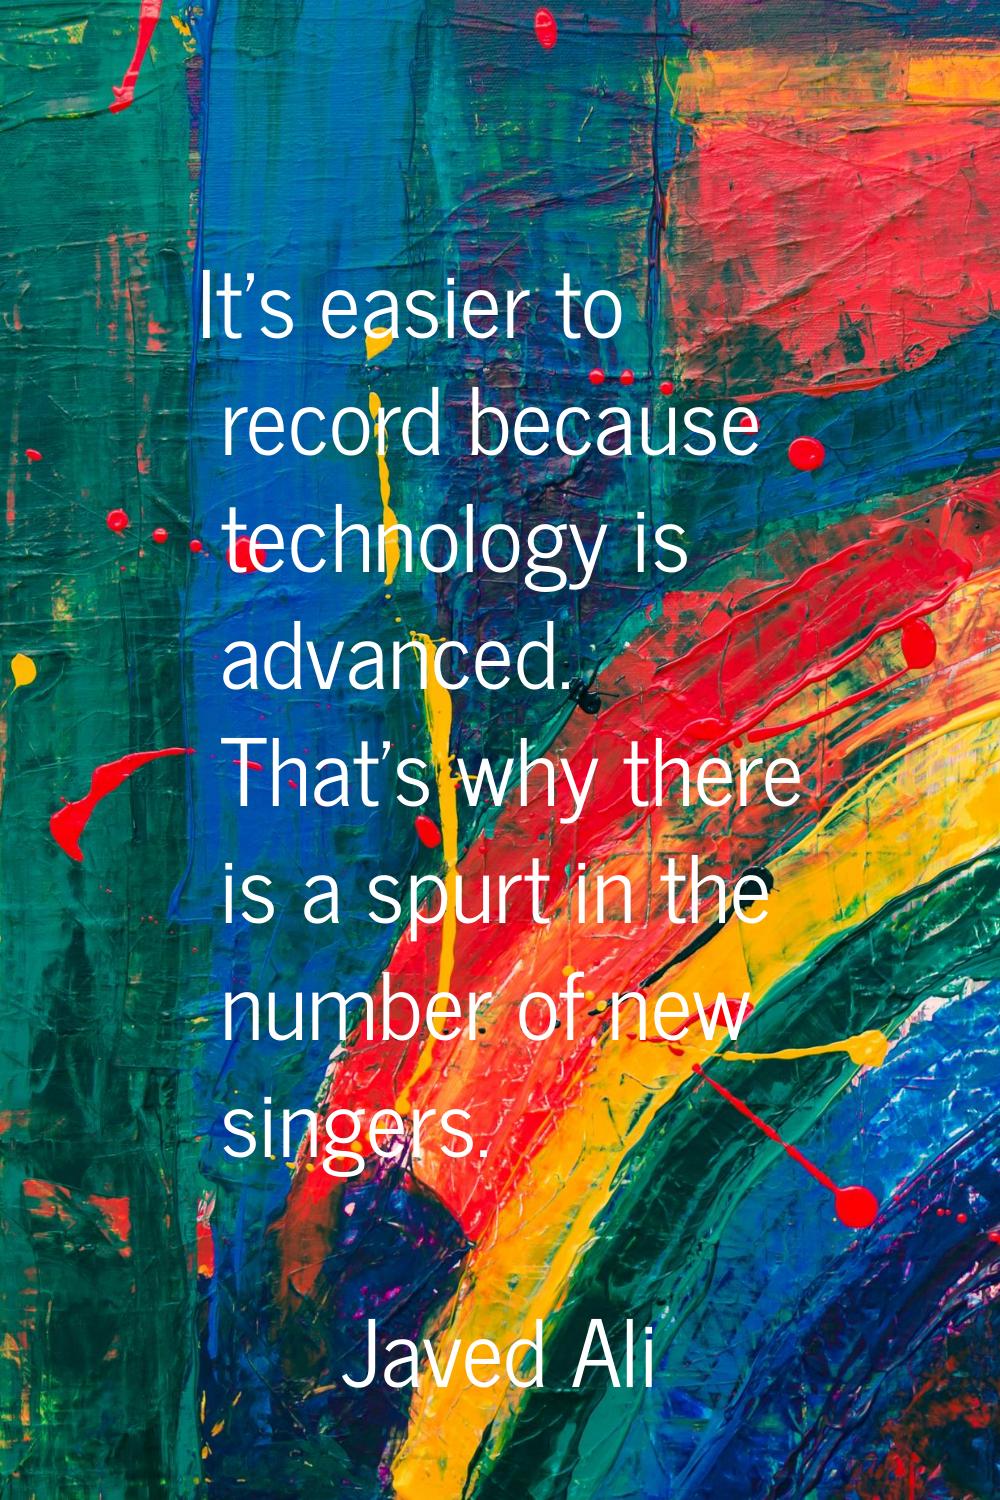 It's easier to record because technology is advanced. That's why there is a spurt in the number of 